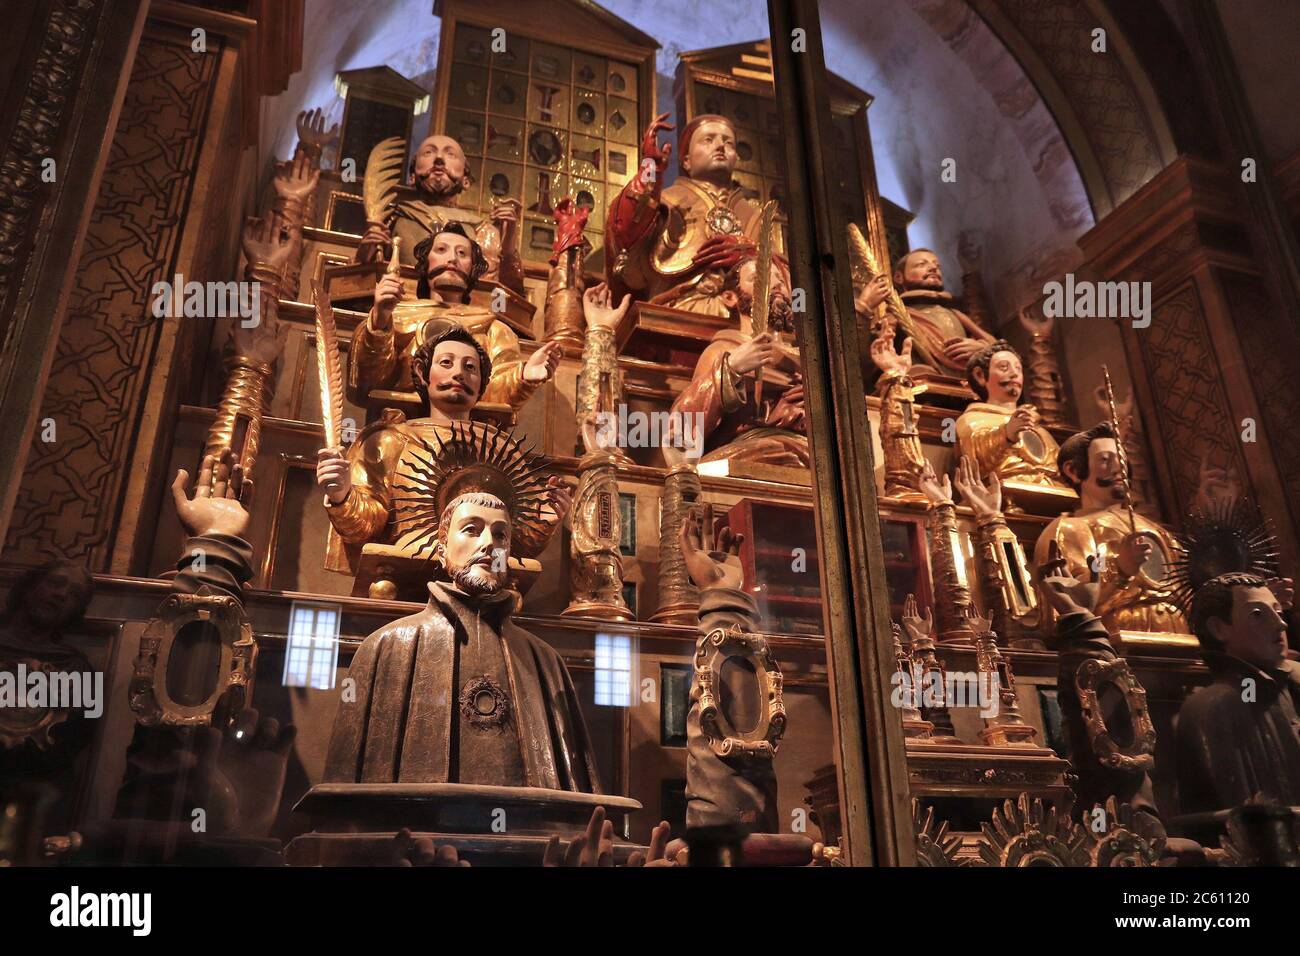 LISBON, PORTUGAL - JUNE 6, 2018: Holy relics collection in Altar of the Holy Martyrs in Church of Saint Roch (Igreja de Sao Roque), Lisbon, Portugal. Stock Photo